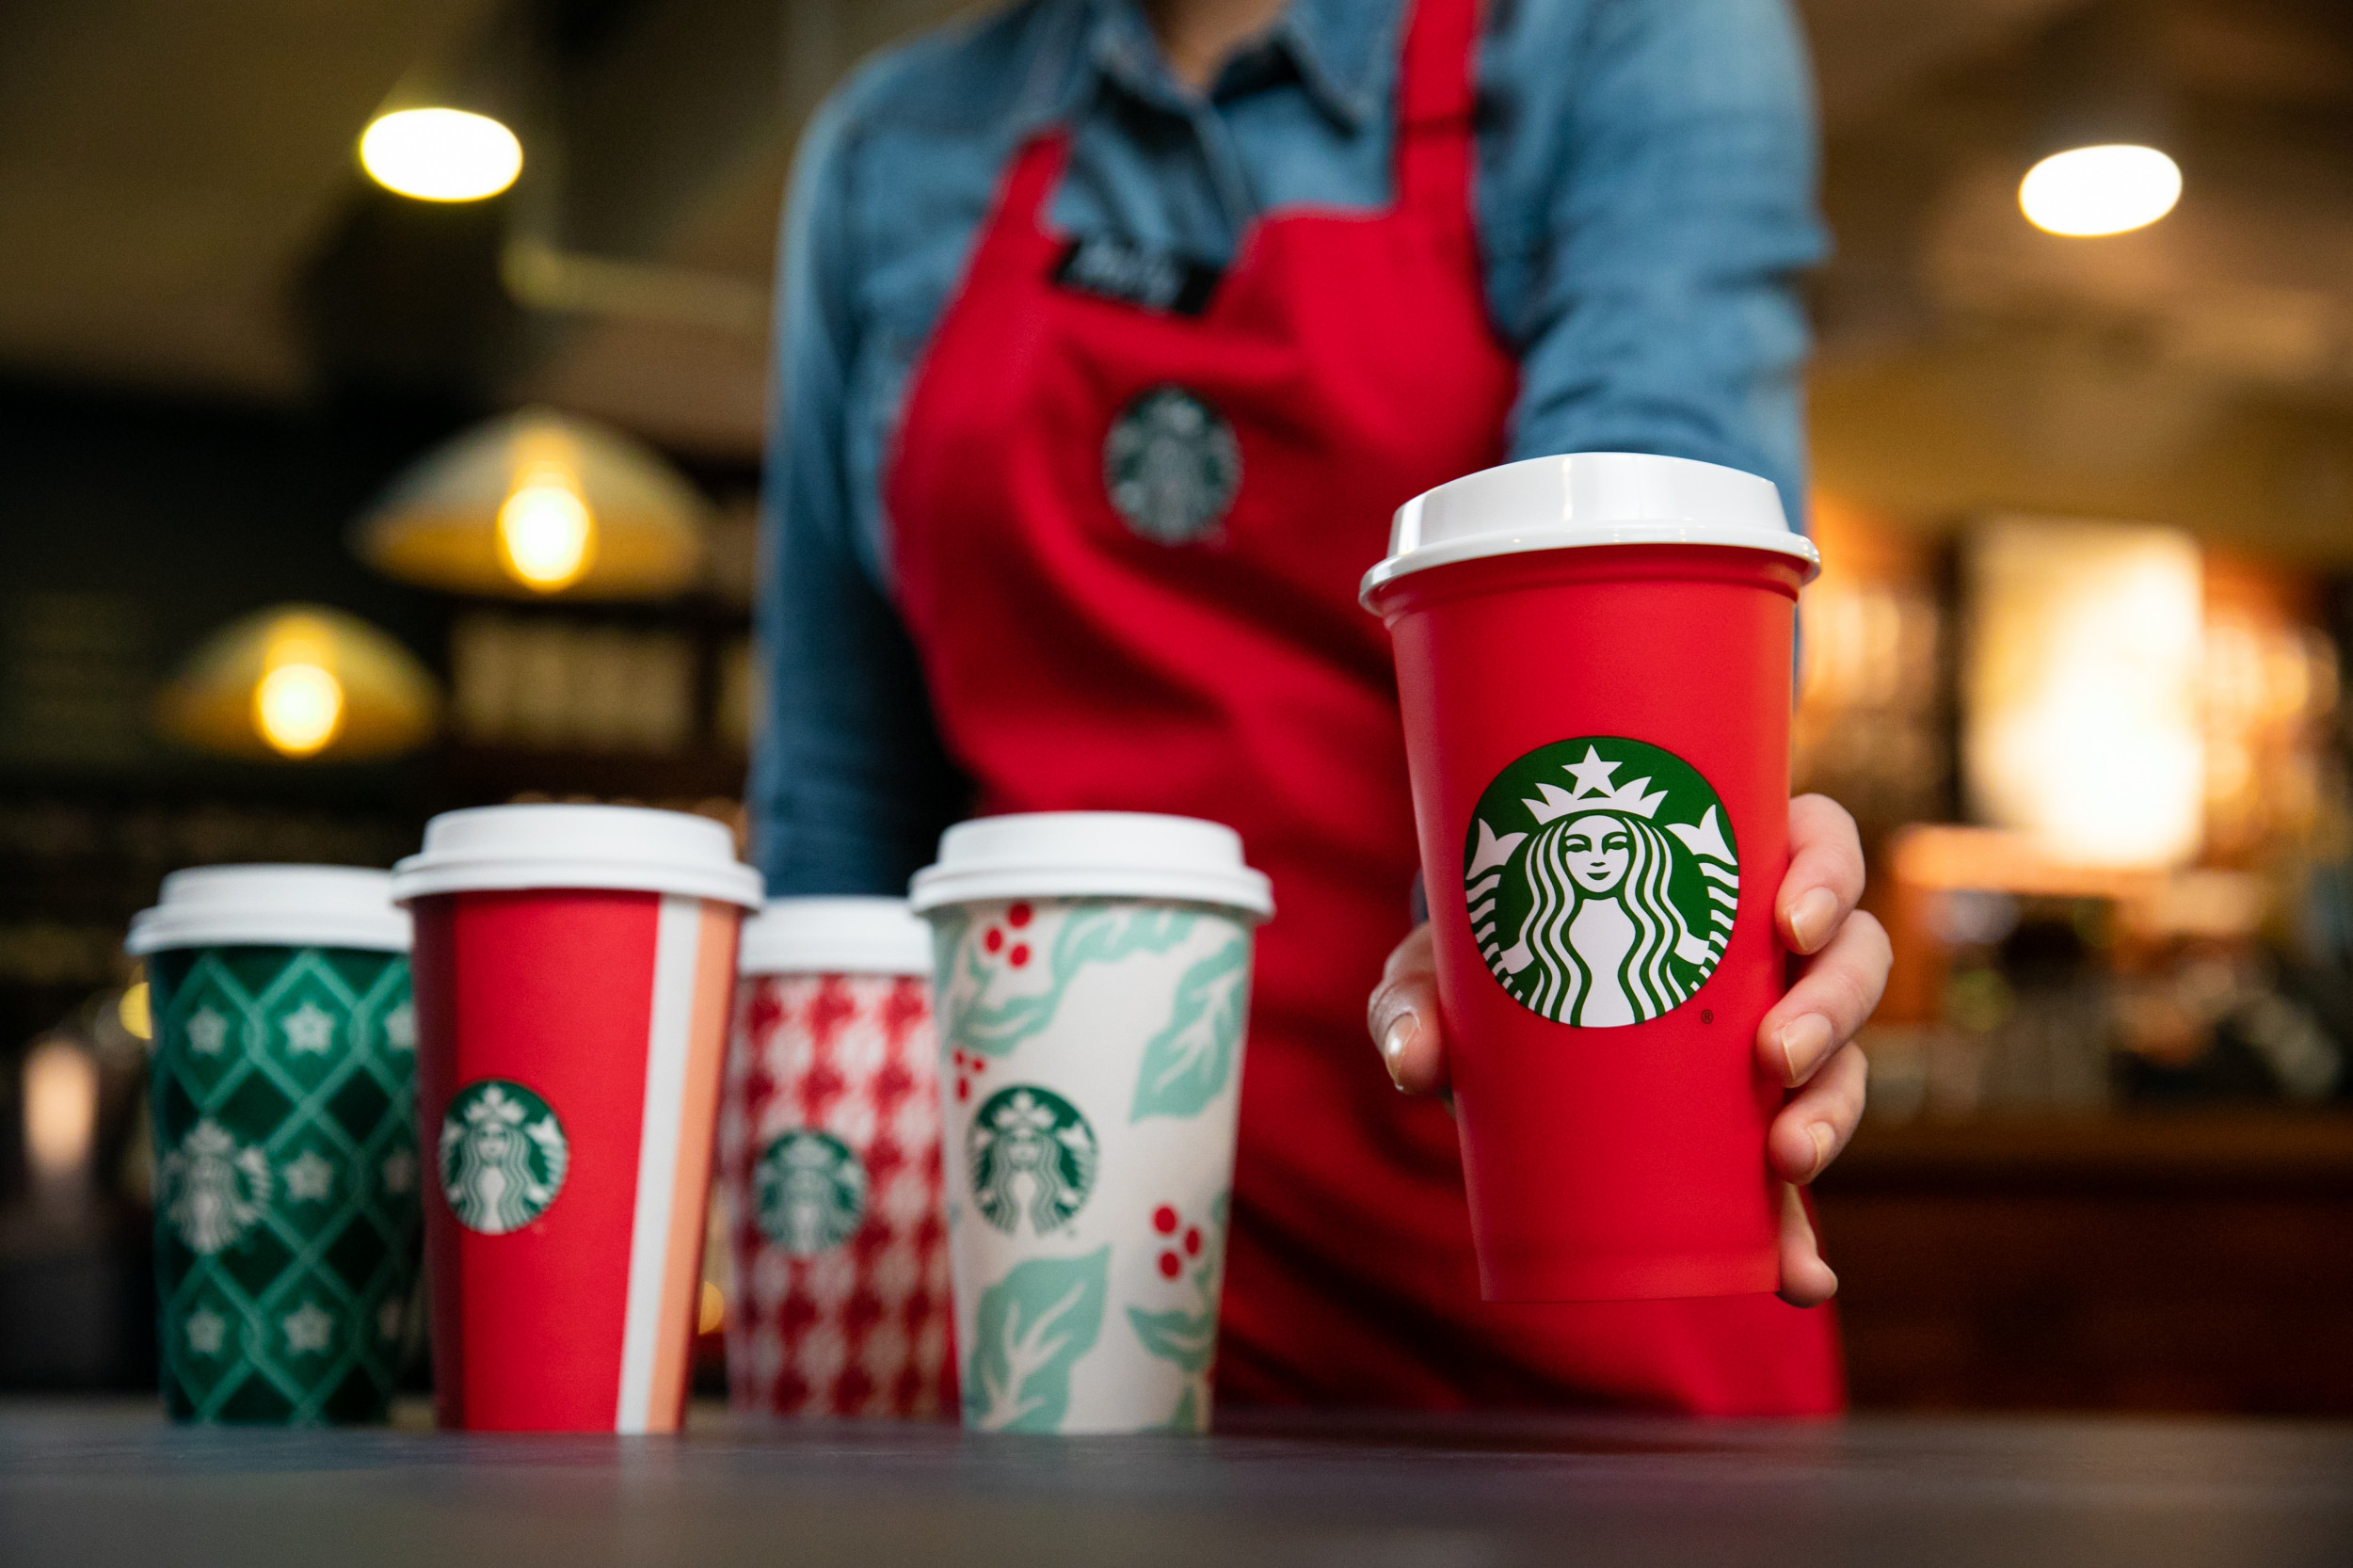 Starbucks Red Cup 2019: A Look at Every Winter Holiday Cup By Year from 199...